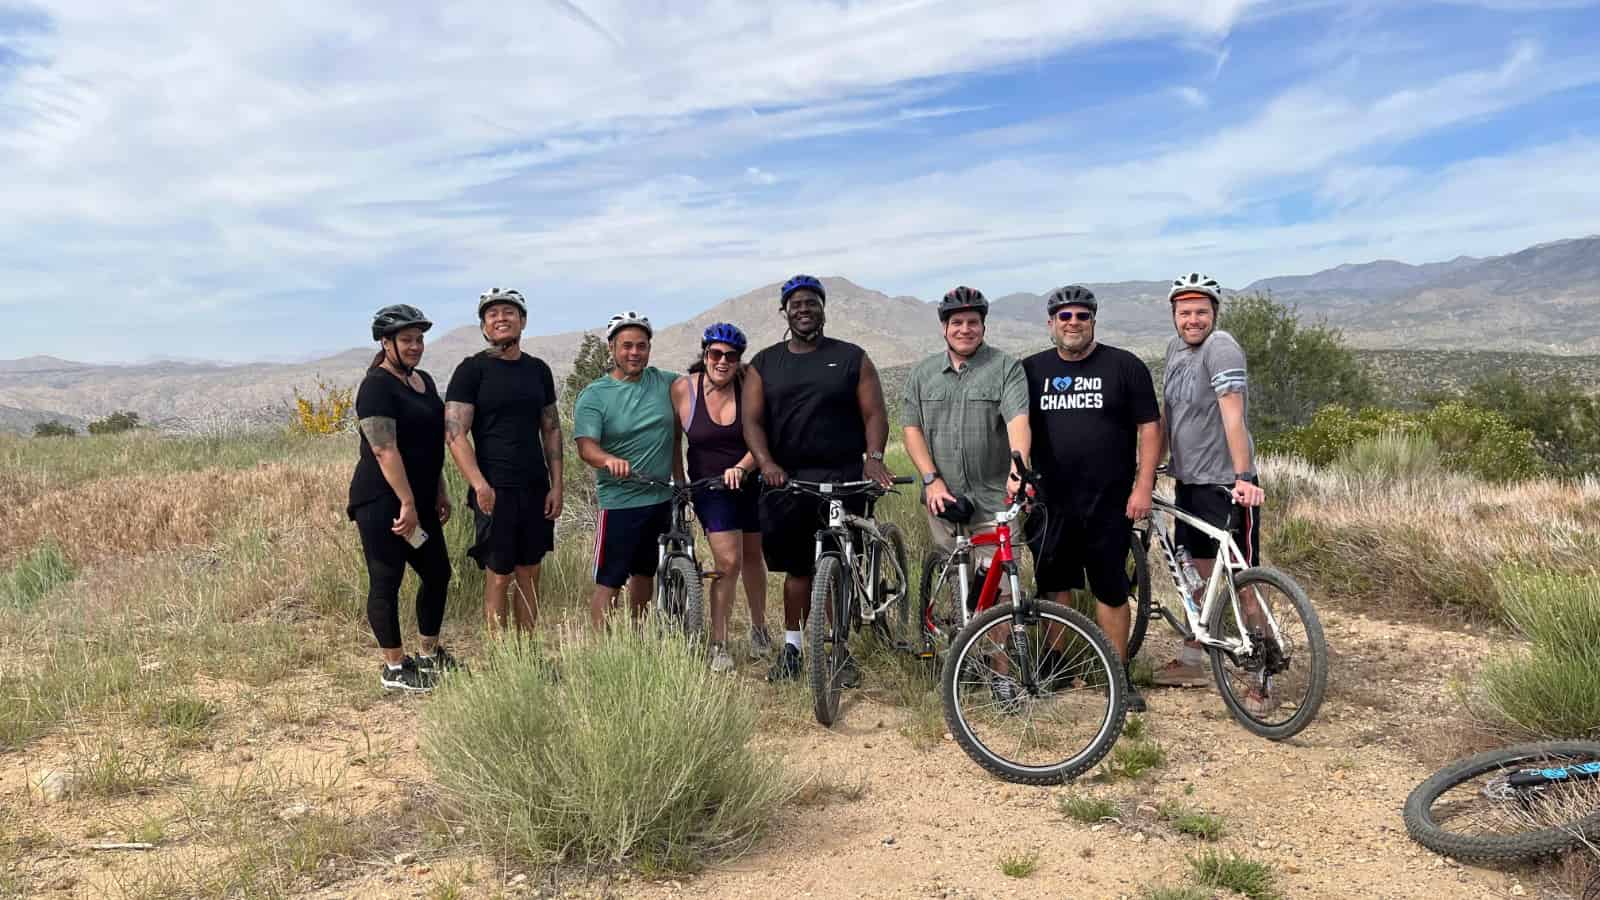 Eight smiling adults of various skin colors, body types, and genders, all dressed in athletic gear or general outdoor clothing and wearing bicycle safety helmets. They are standing in an informal row in the middle of a rocky arid landscape with low bushes and dried grass, and the sky is blue but filled with thin, windswept white clouds. Three of the people are holding up mountain bikes, and there is the front wheel of another mountain bike on its side in the near right foreground. In the far distance behind the group are low hills.